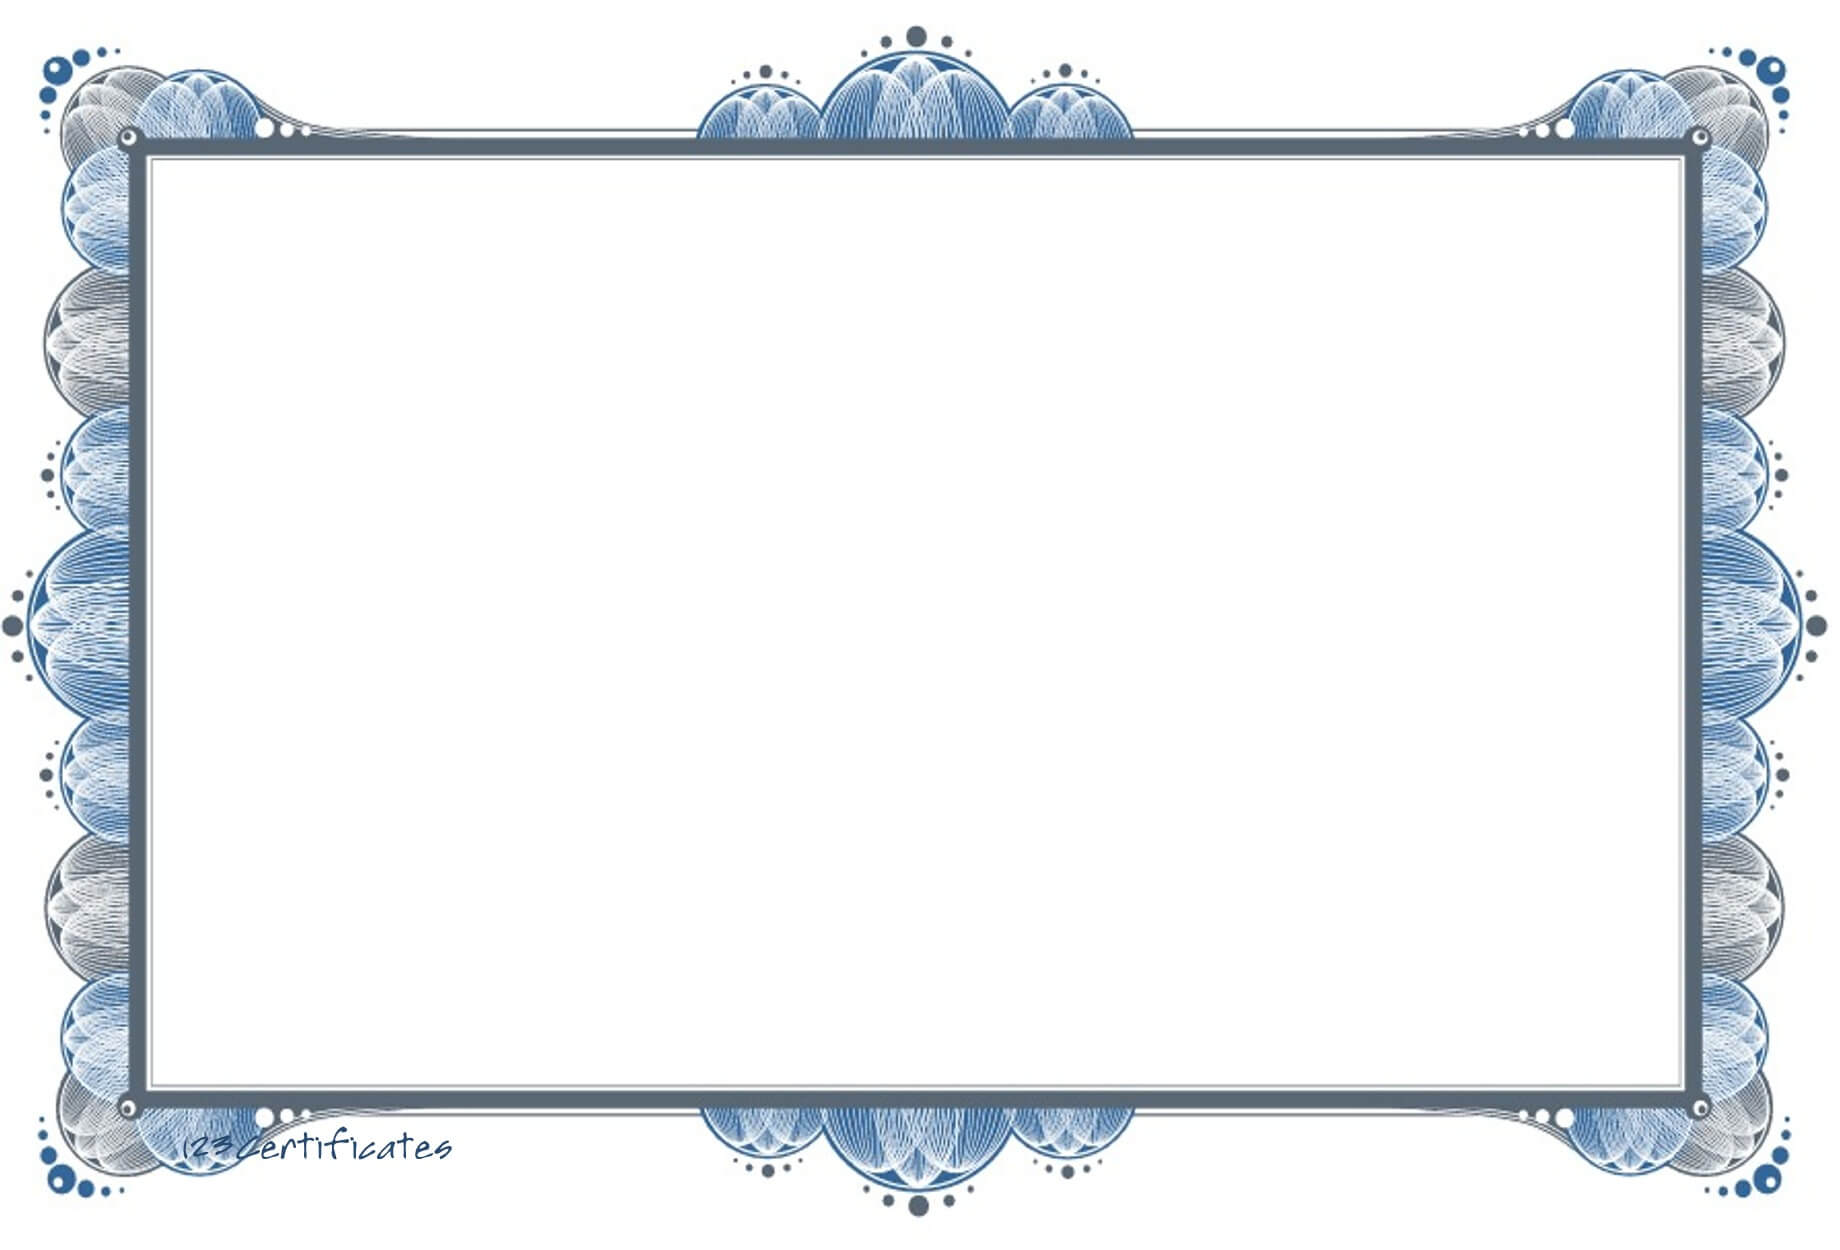 Free Certificate Borders, Download Free Clip Art, Free Clip Within Award Certificate Border Template